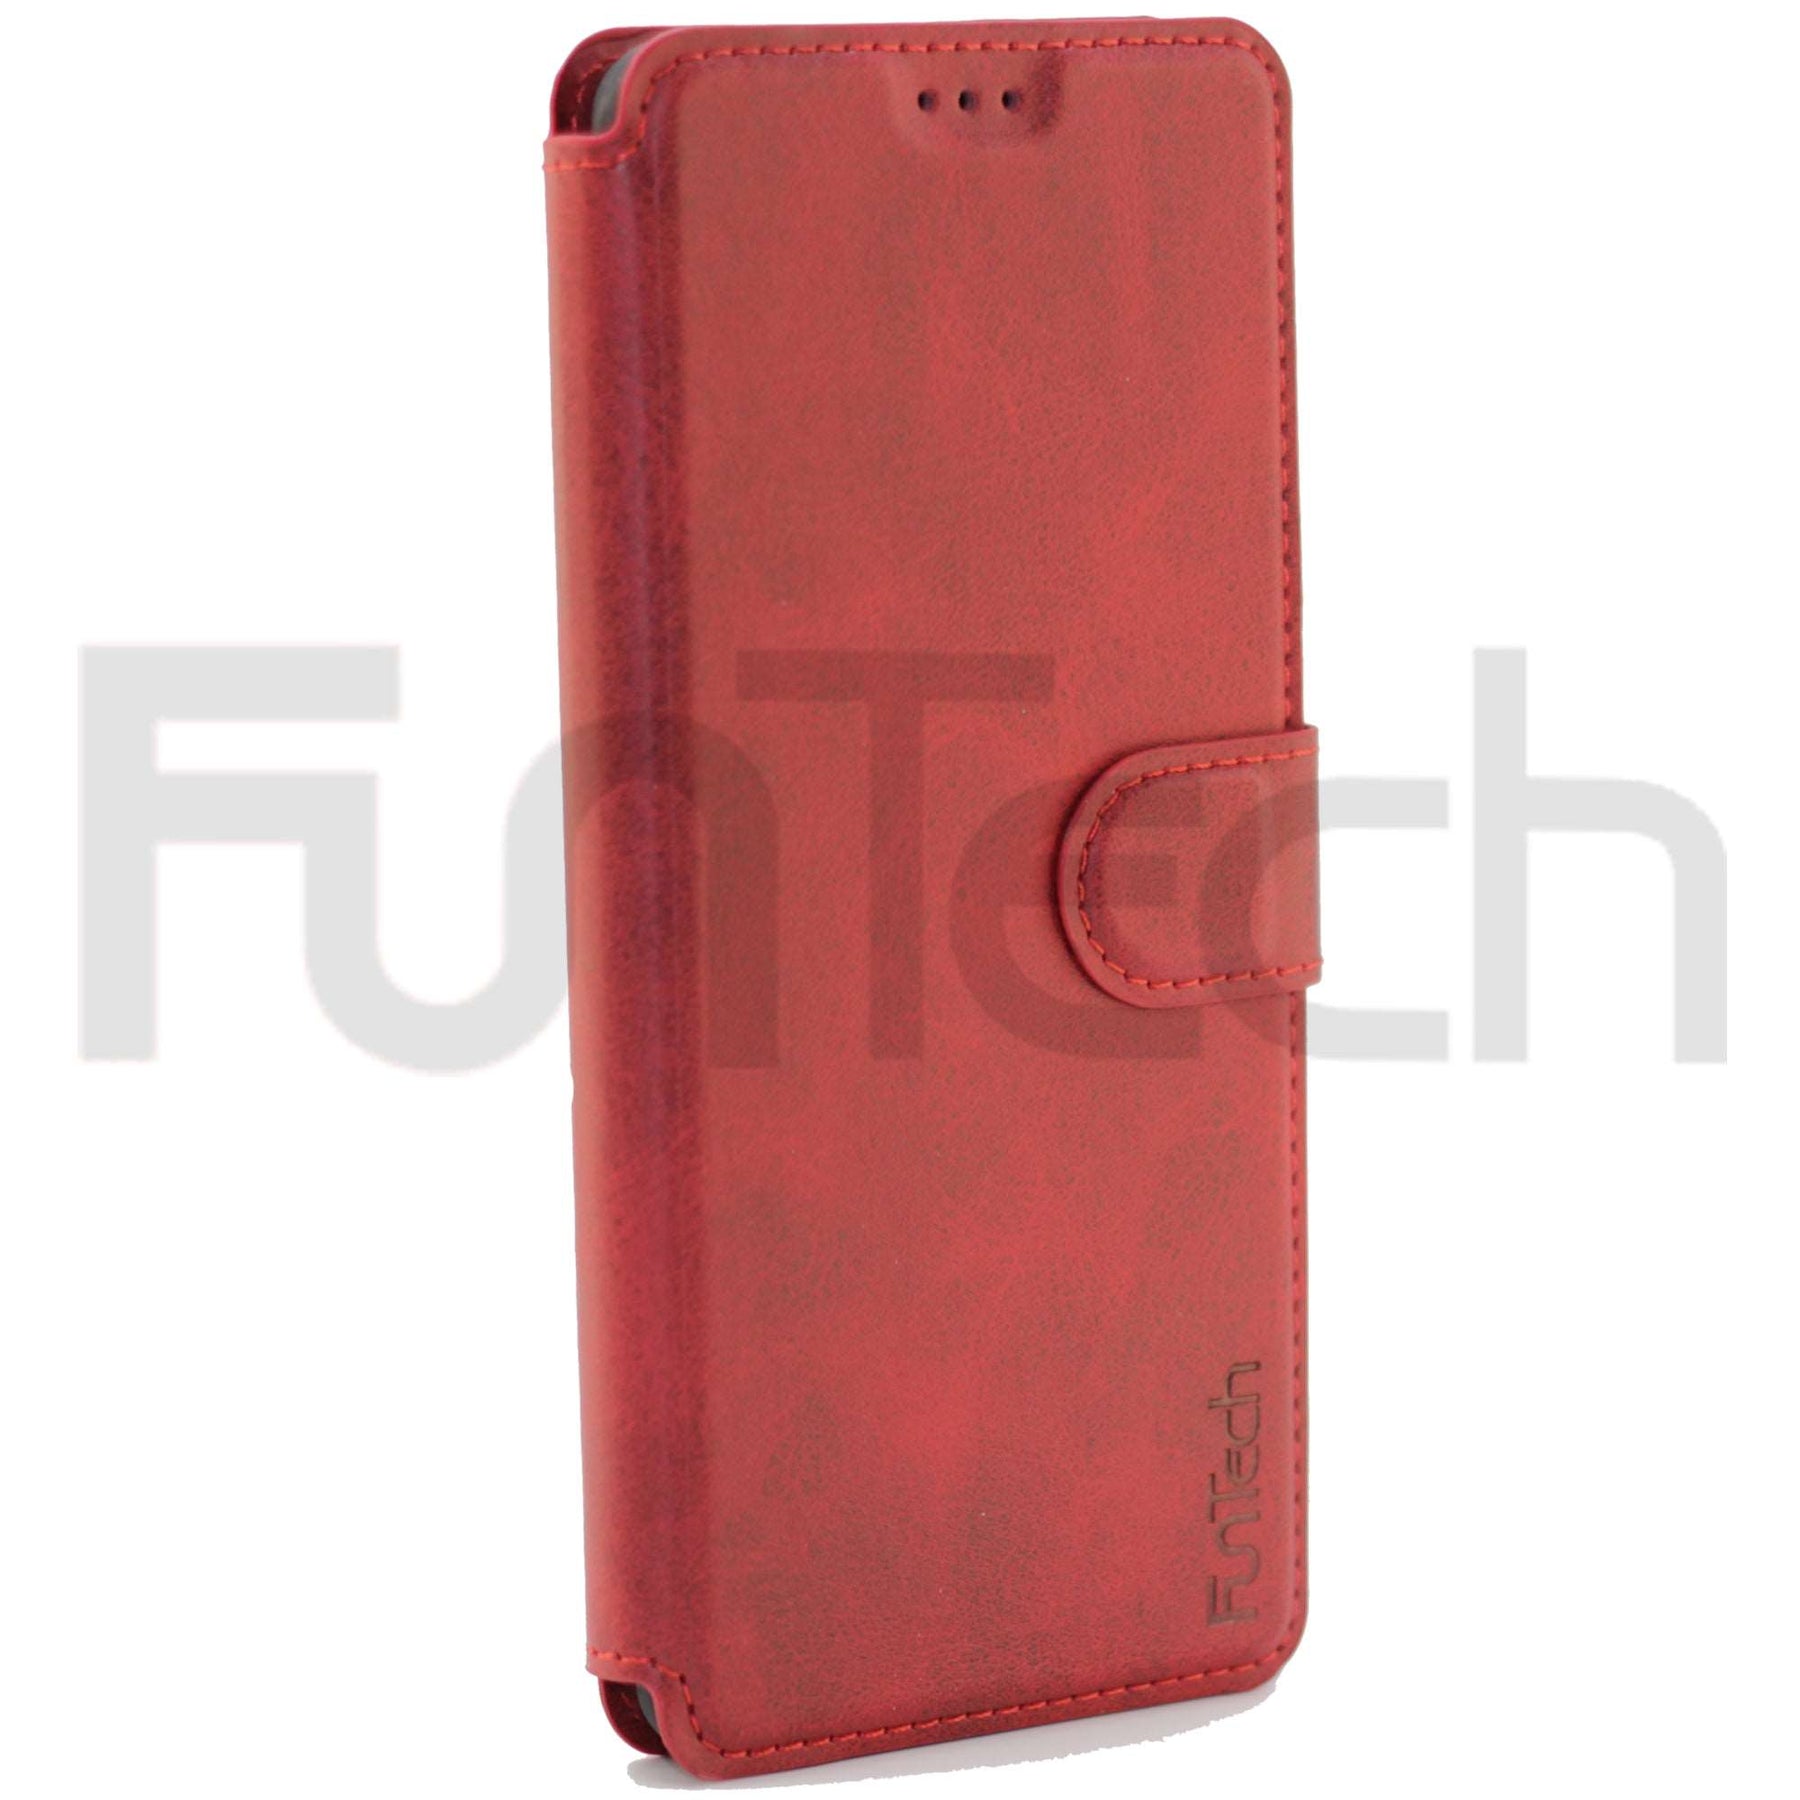 Huawei P30 Pro, Leather Wallet Case, Color Red,